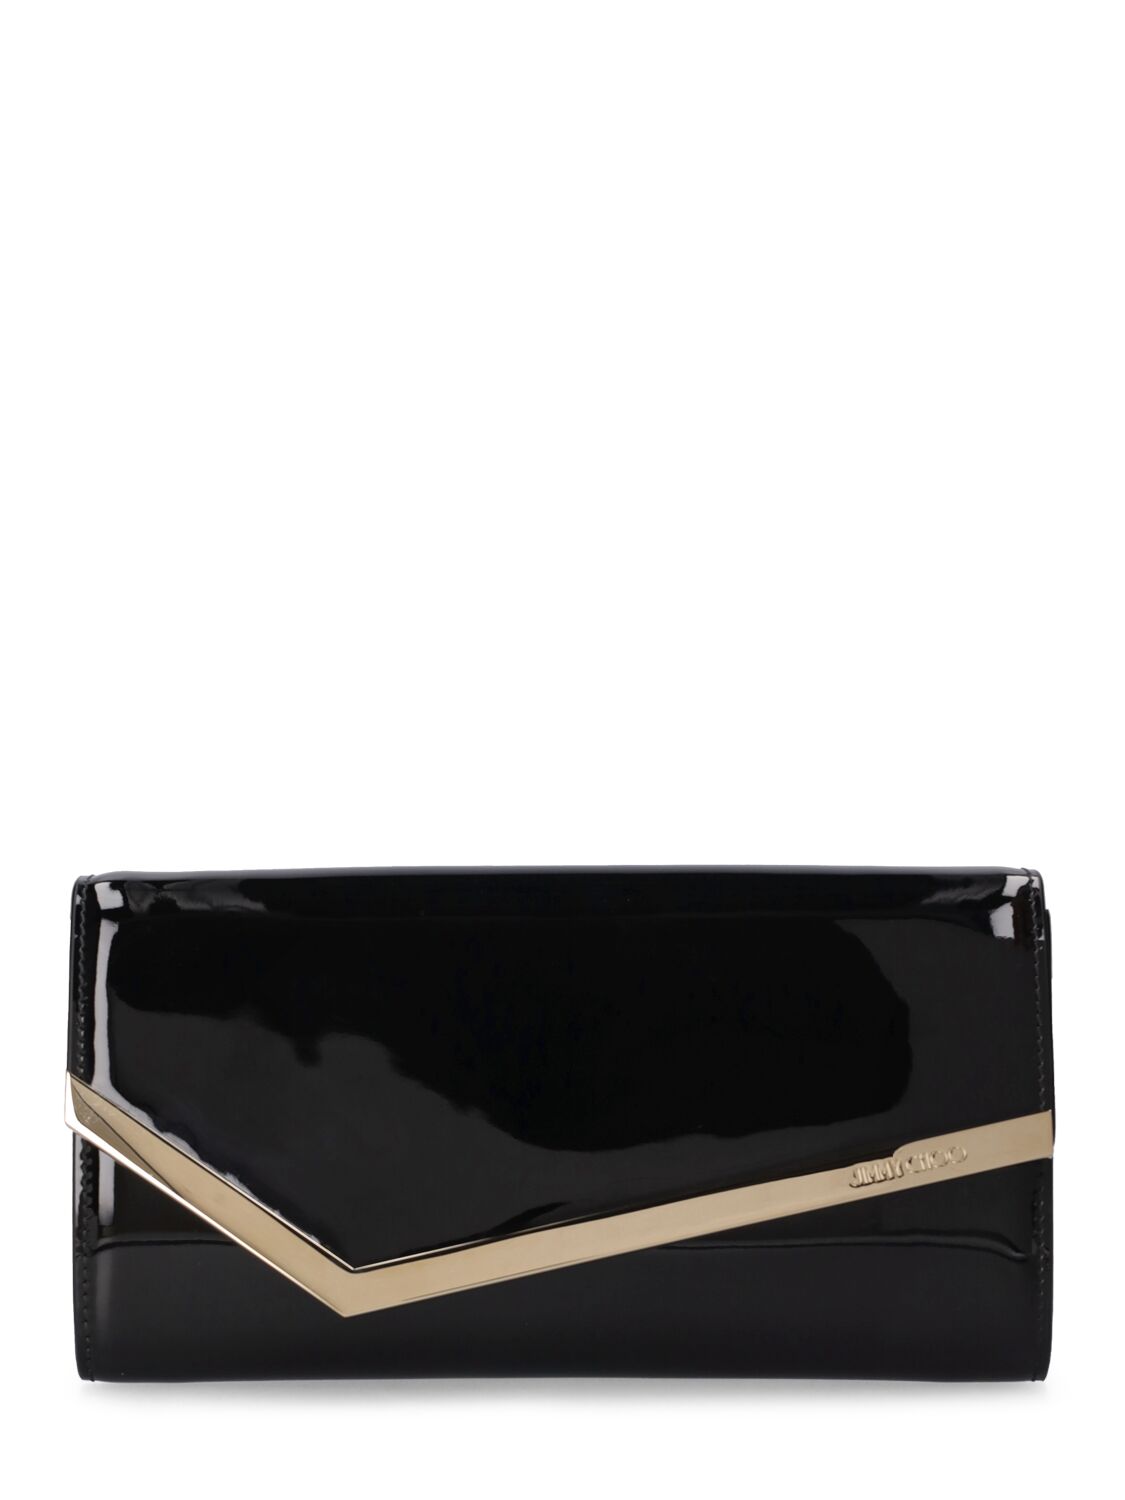 Image of Emmie Patent Leather Clutch